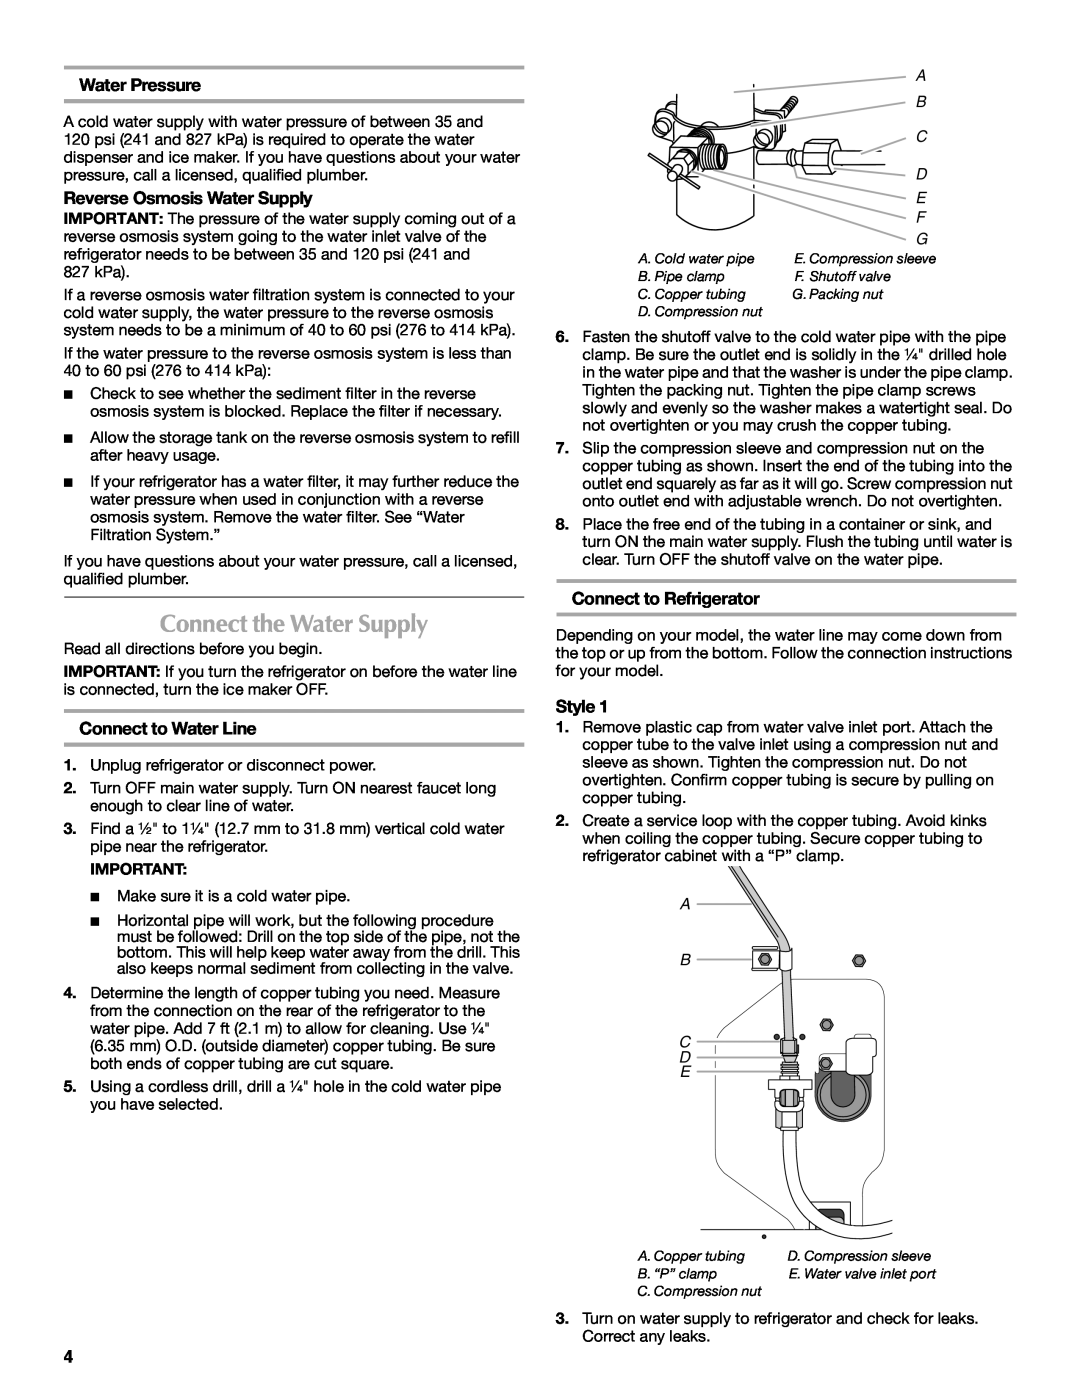 Maytag W10208789A Connect the Water Supply, Water Pressure, Reverse Osmosis Water Supply, Connect to Water Line, Style 